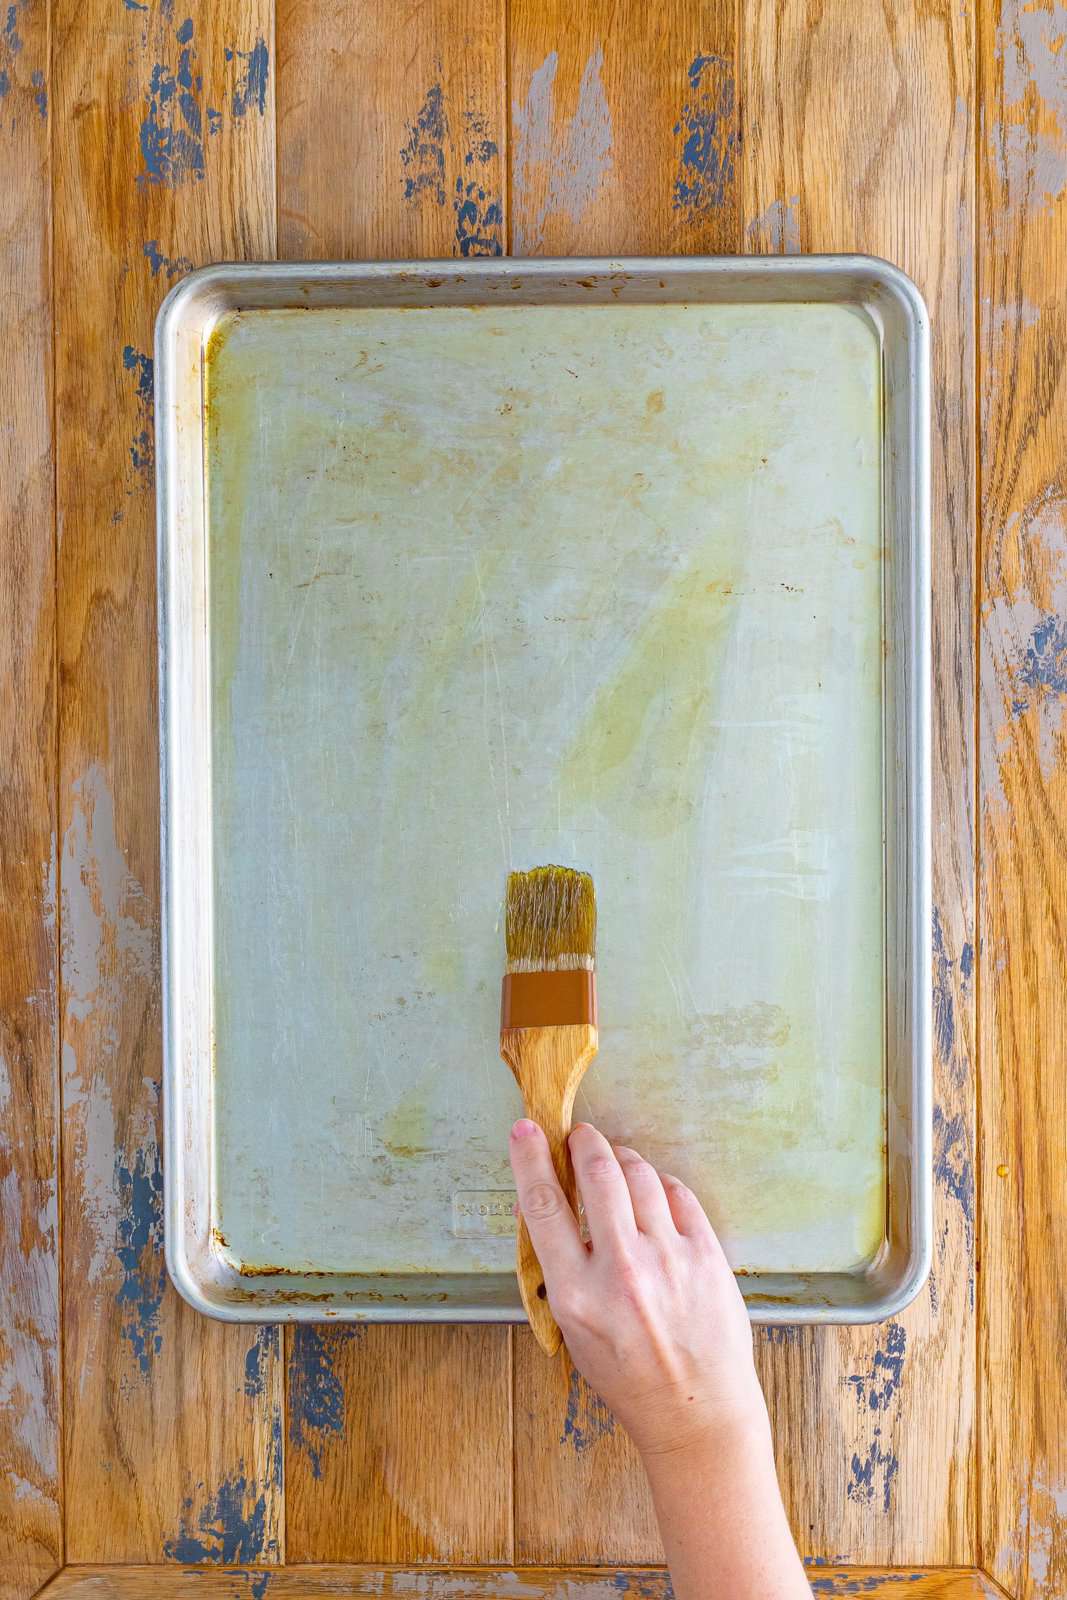 A sheet pan being brushed with oil.